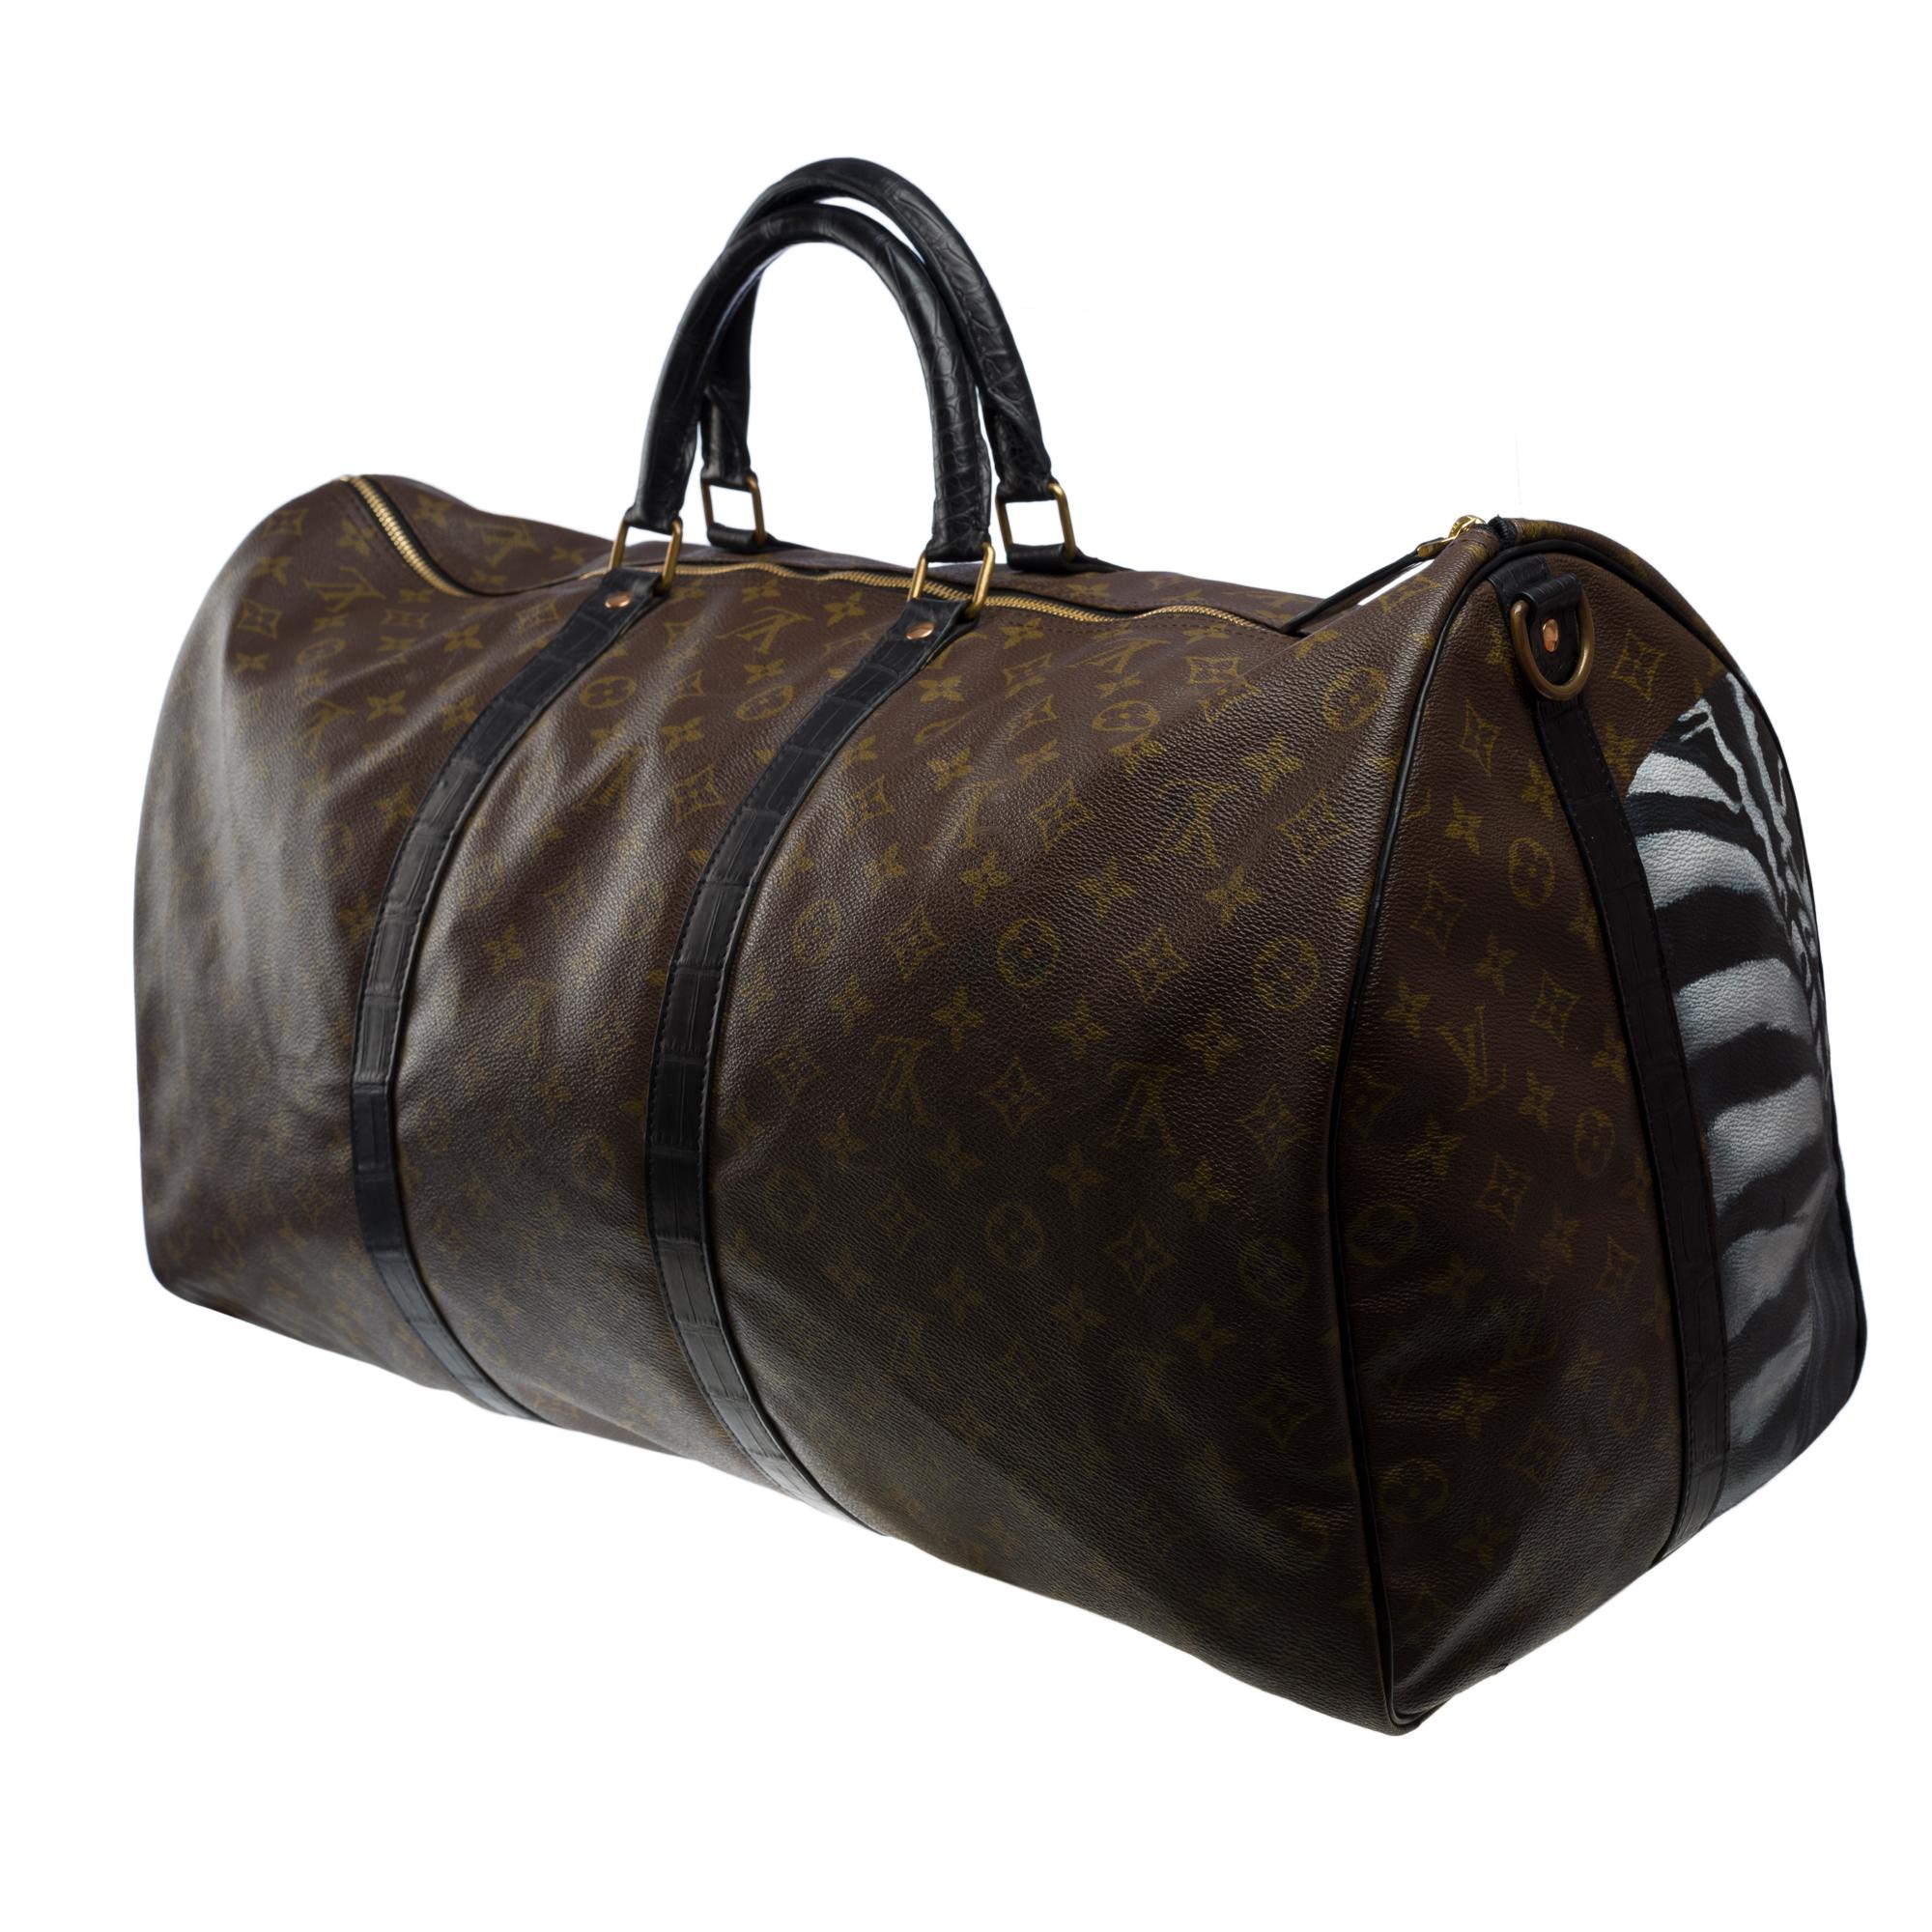 Customized Louis Vuitton Keepall 60 strap Travel bag with Black Crocodile For Sale 2